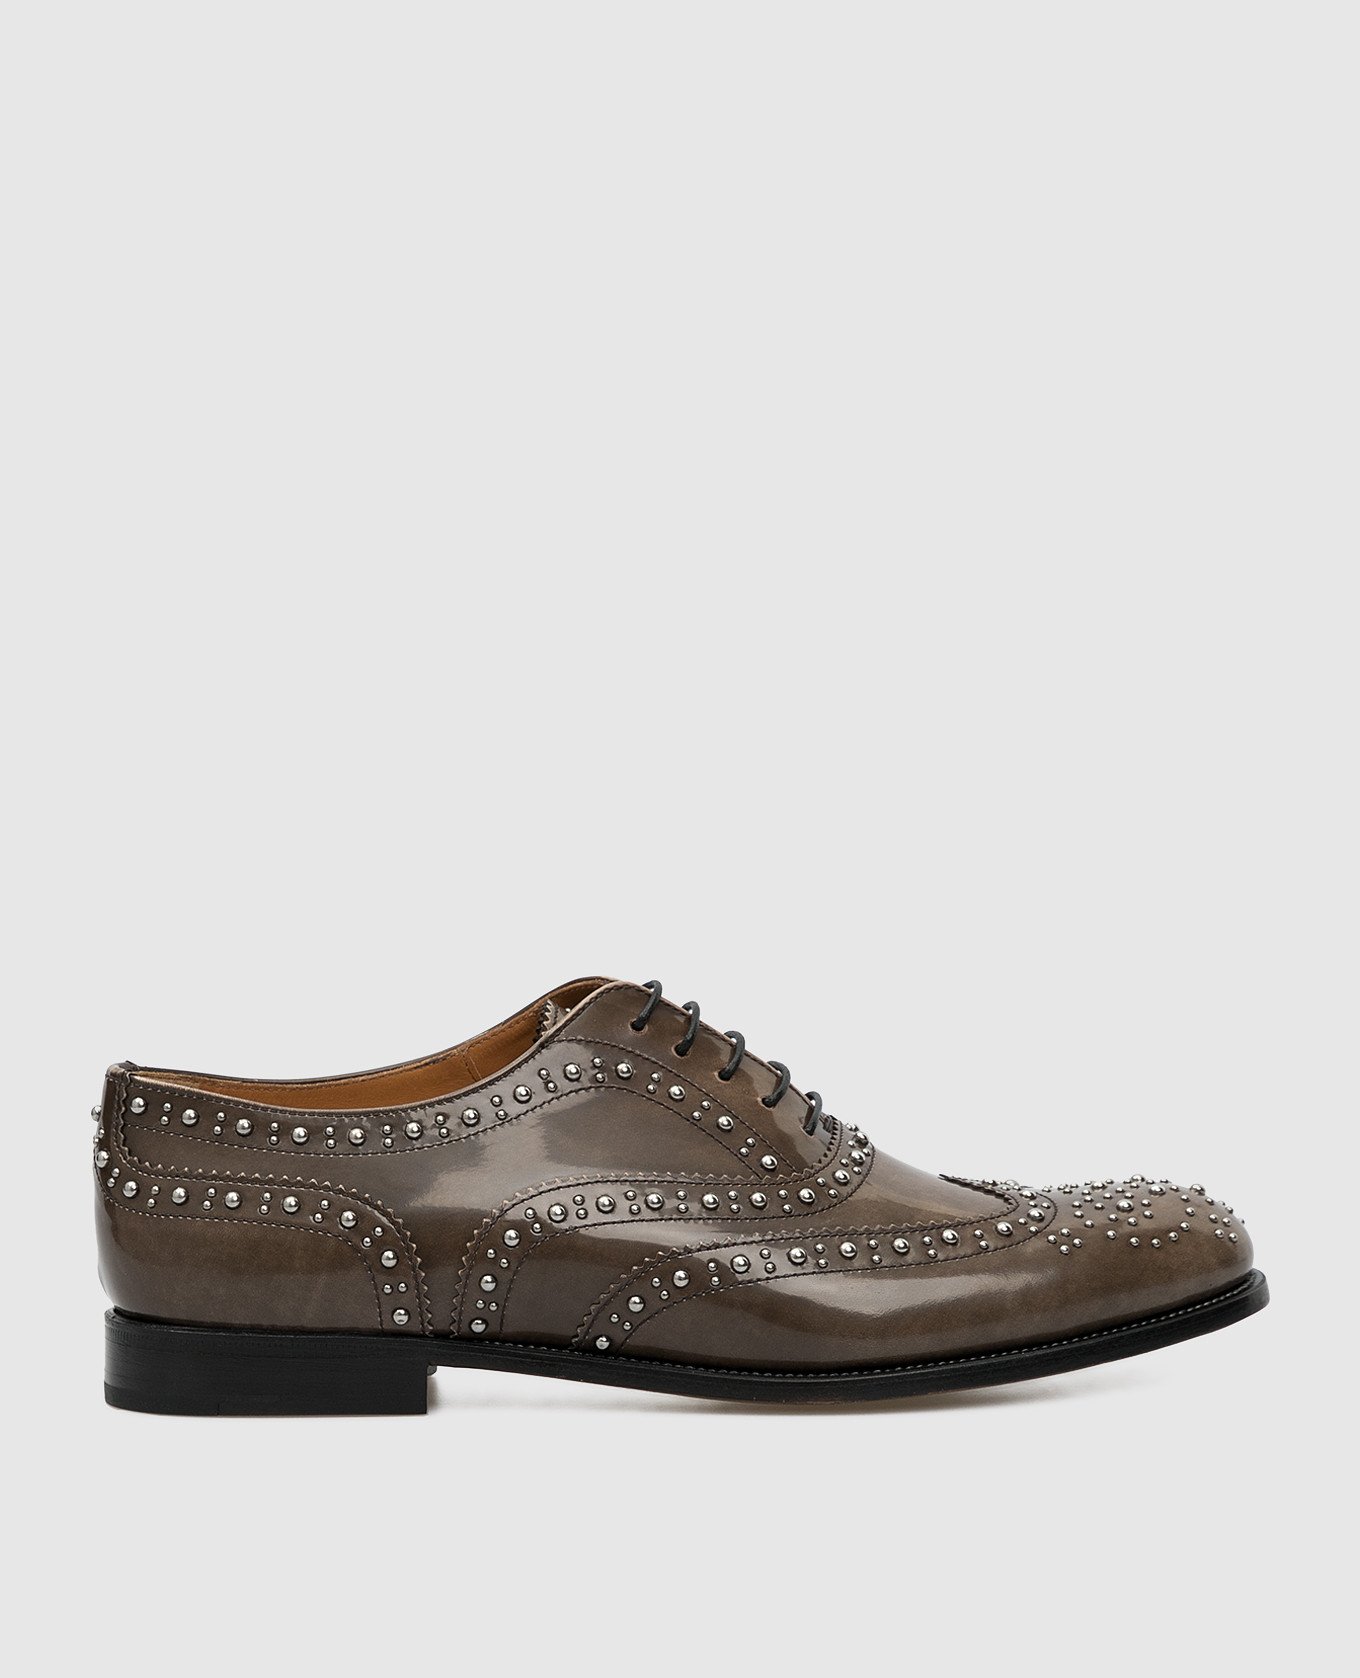 Brown leather oxford shoes